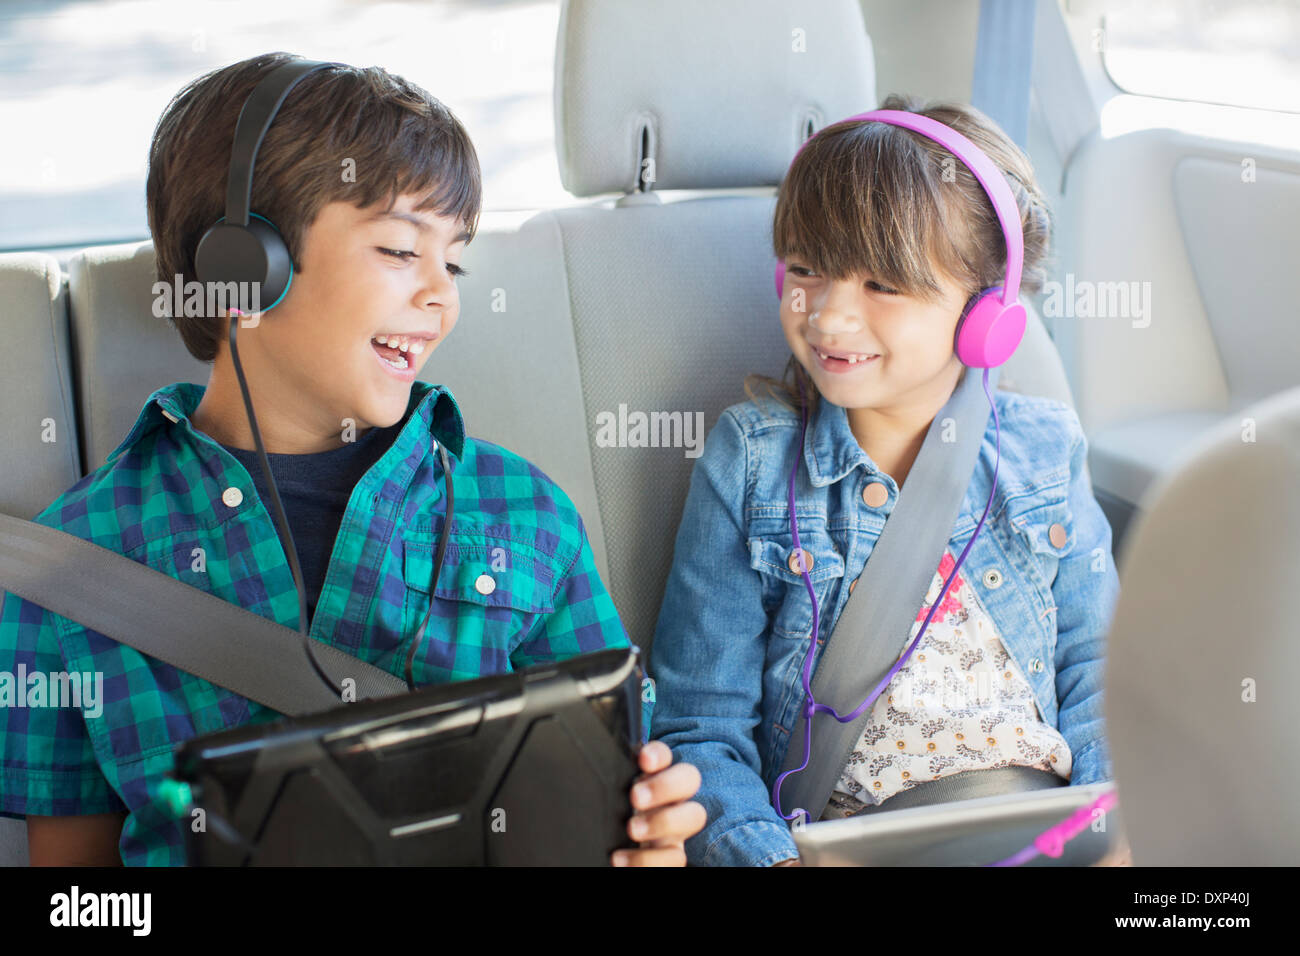 Happy brother and sister with headphones using digital tablets in back seat of car Stock Photo